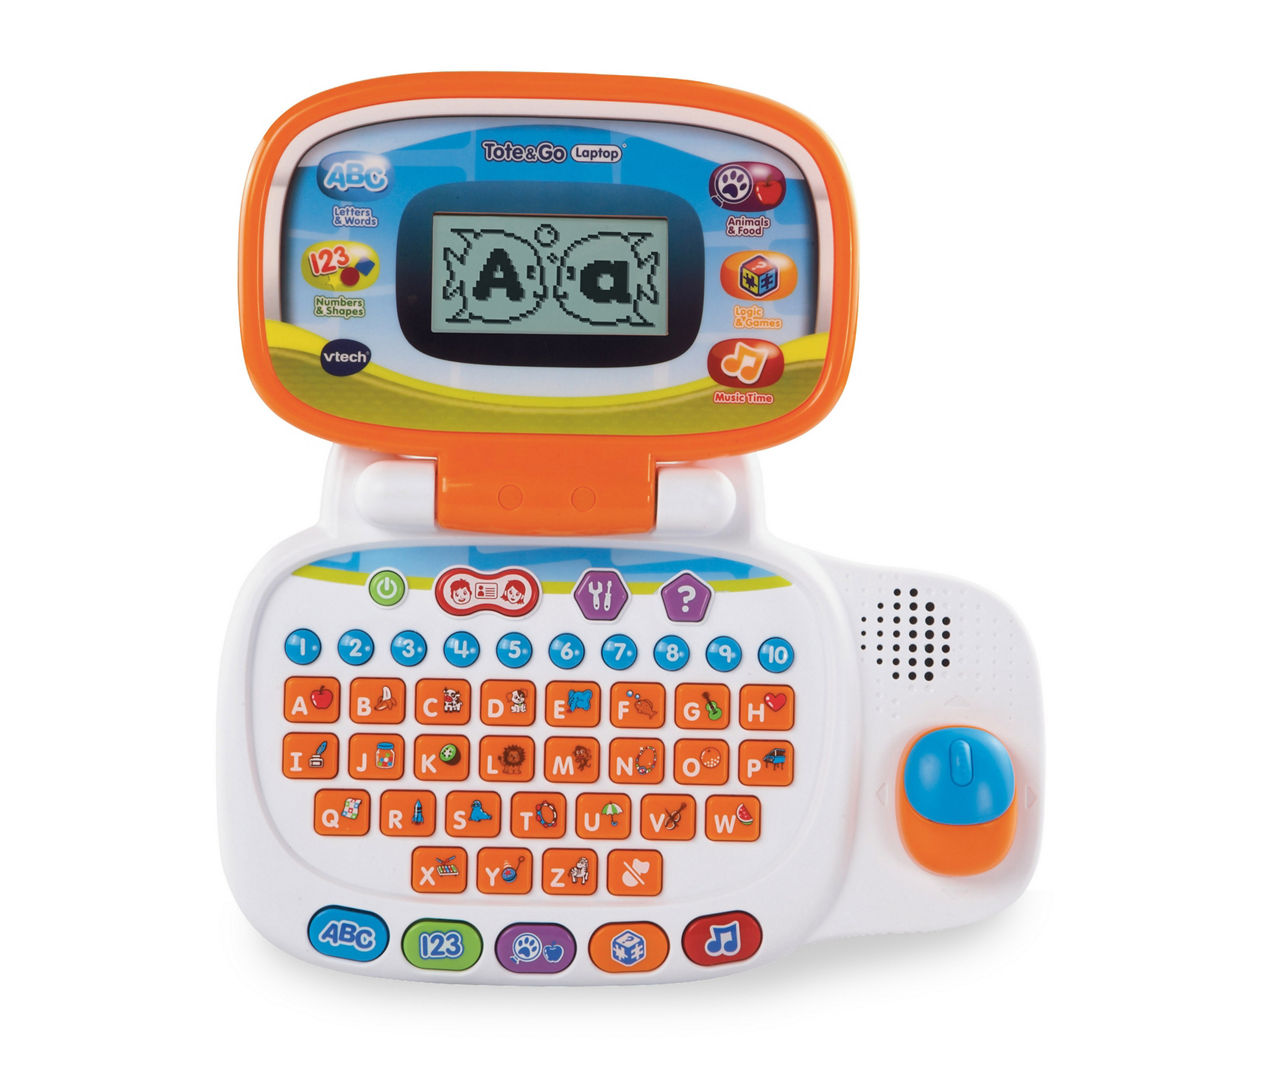 vtech tote and go laptop plus